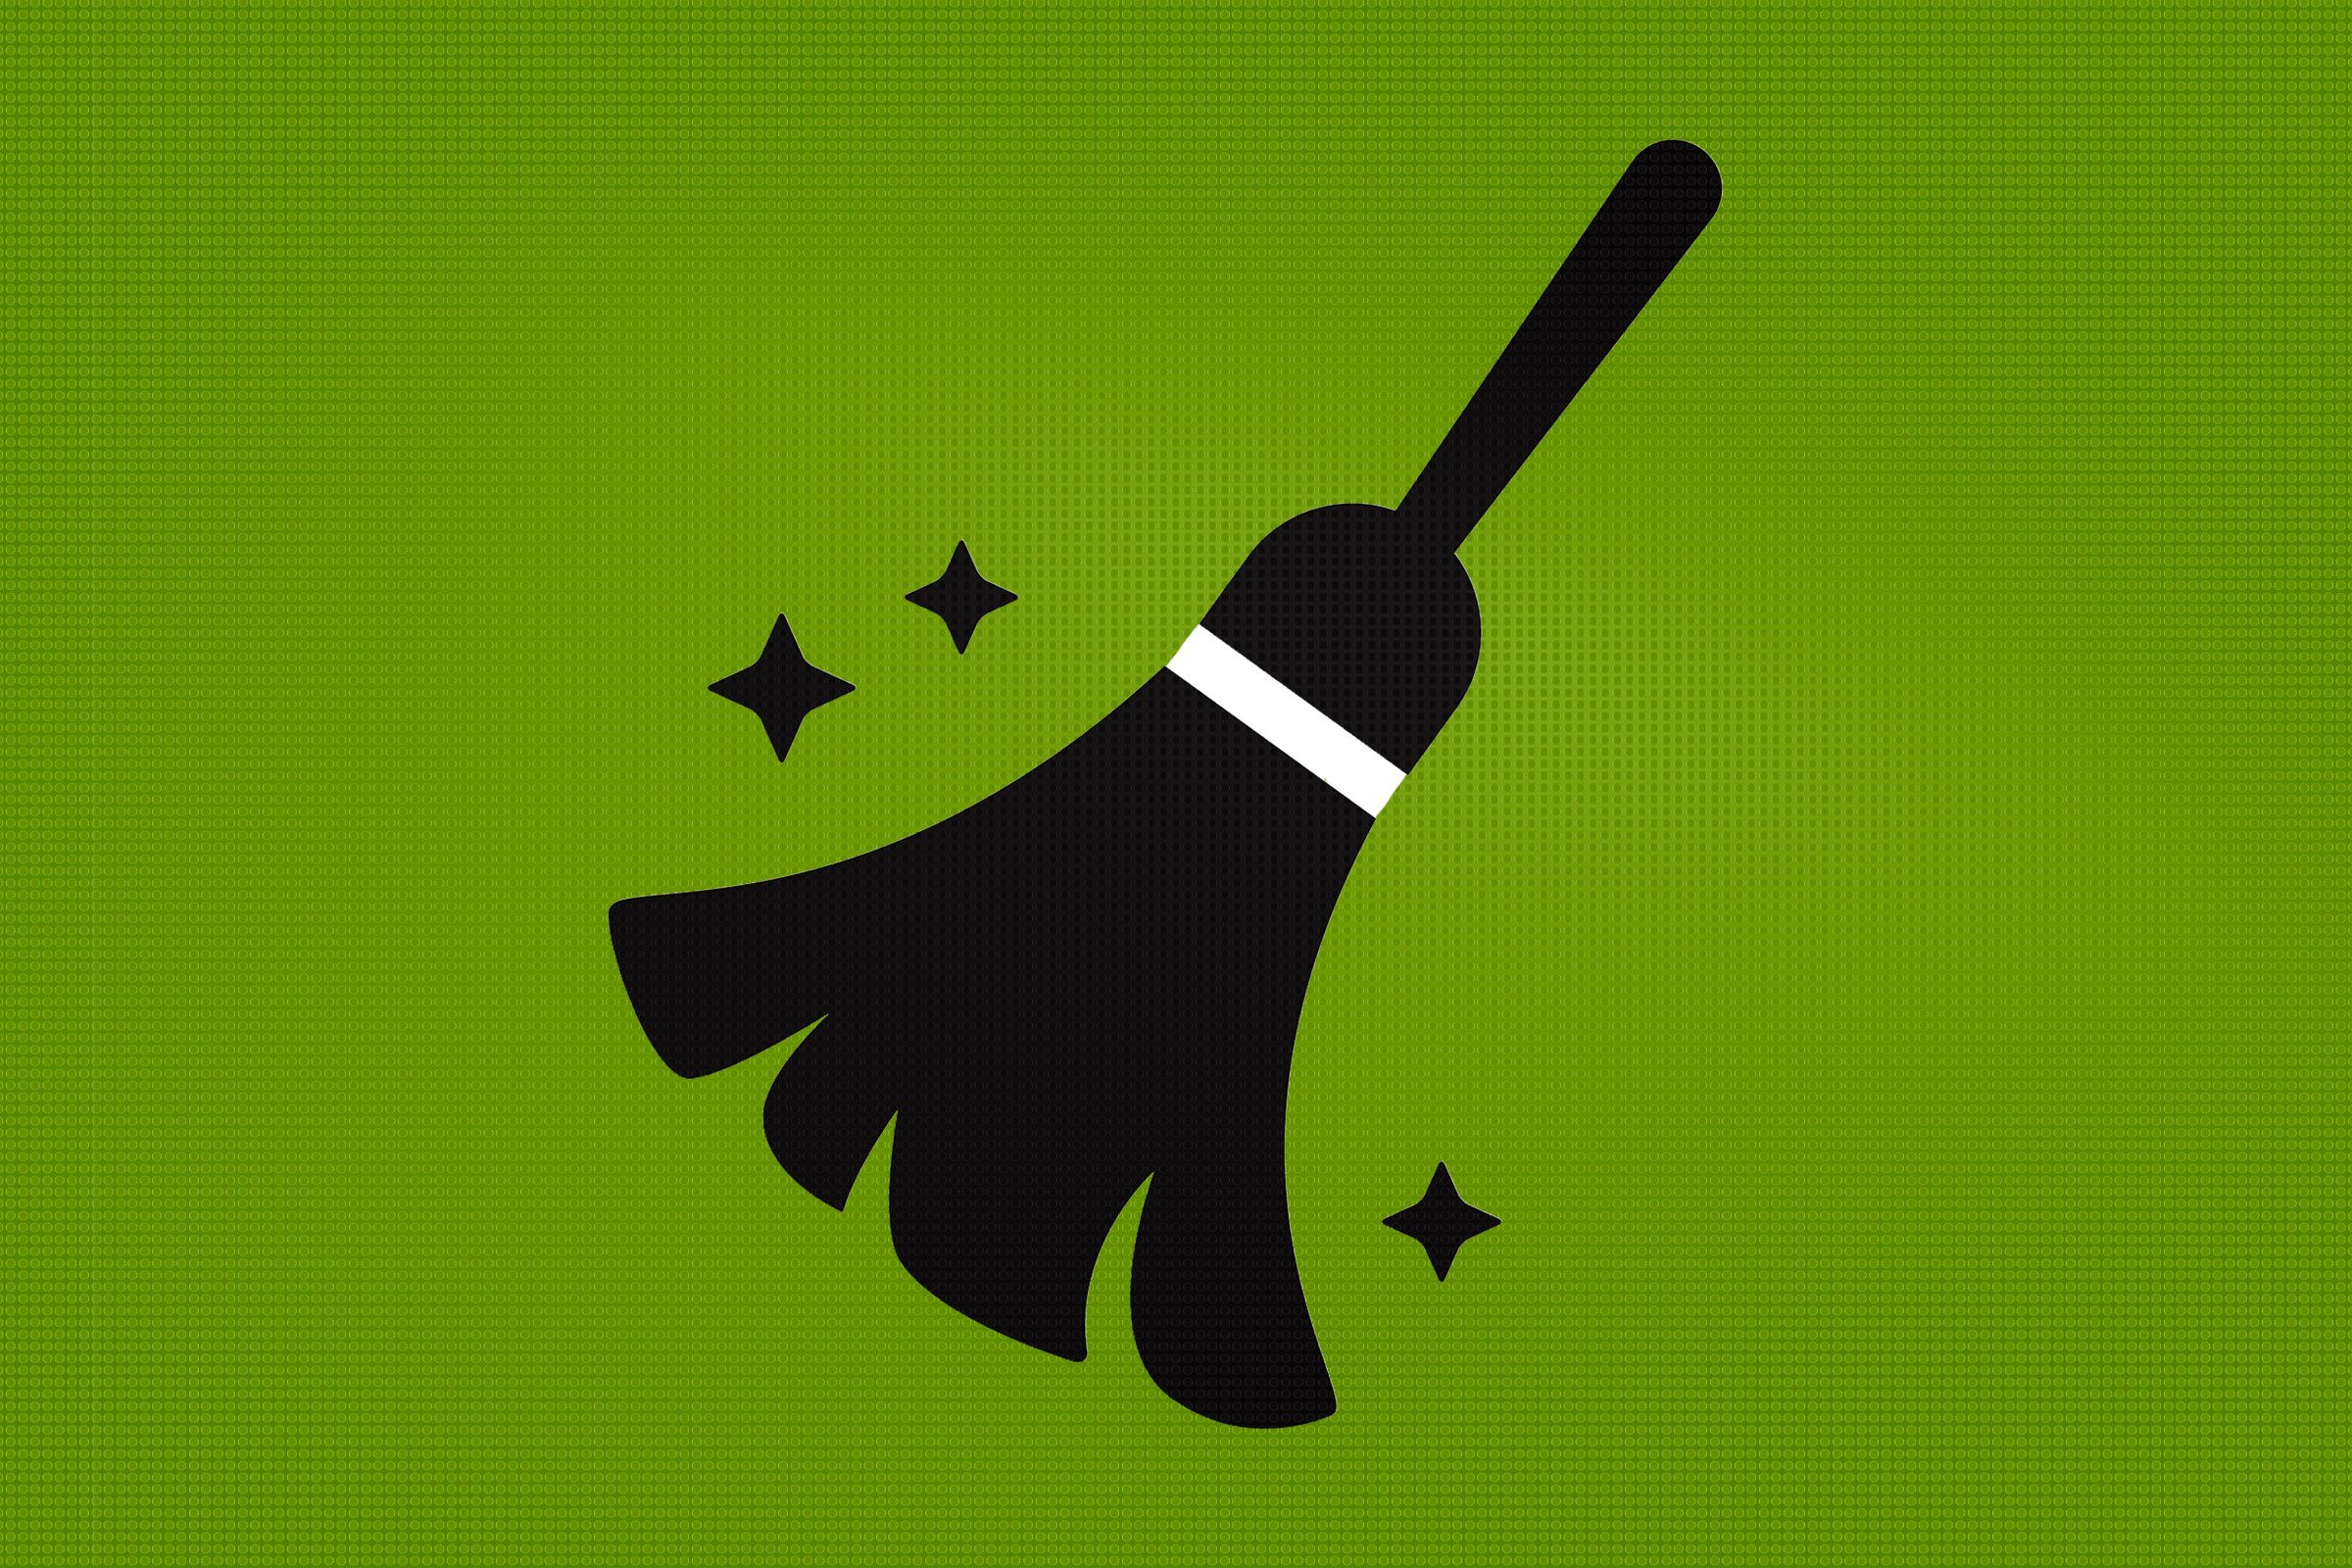 cleaning brush icon on green background